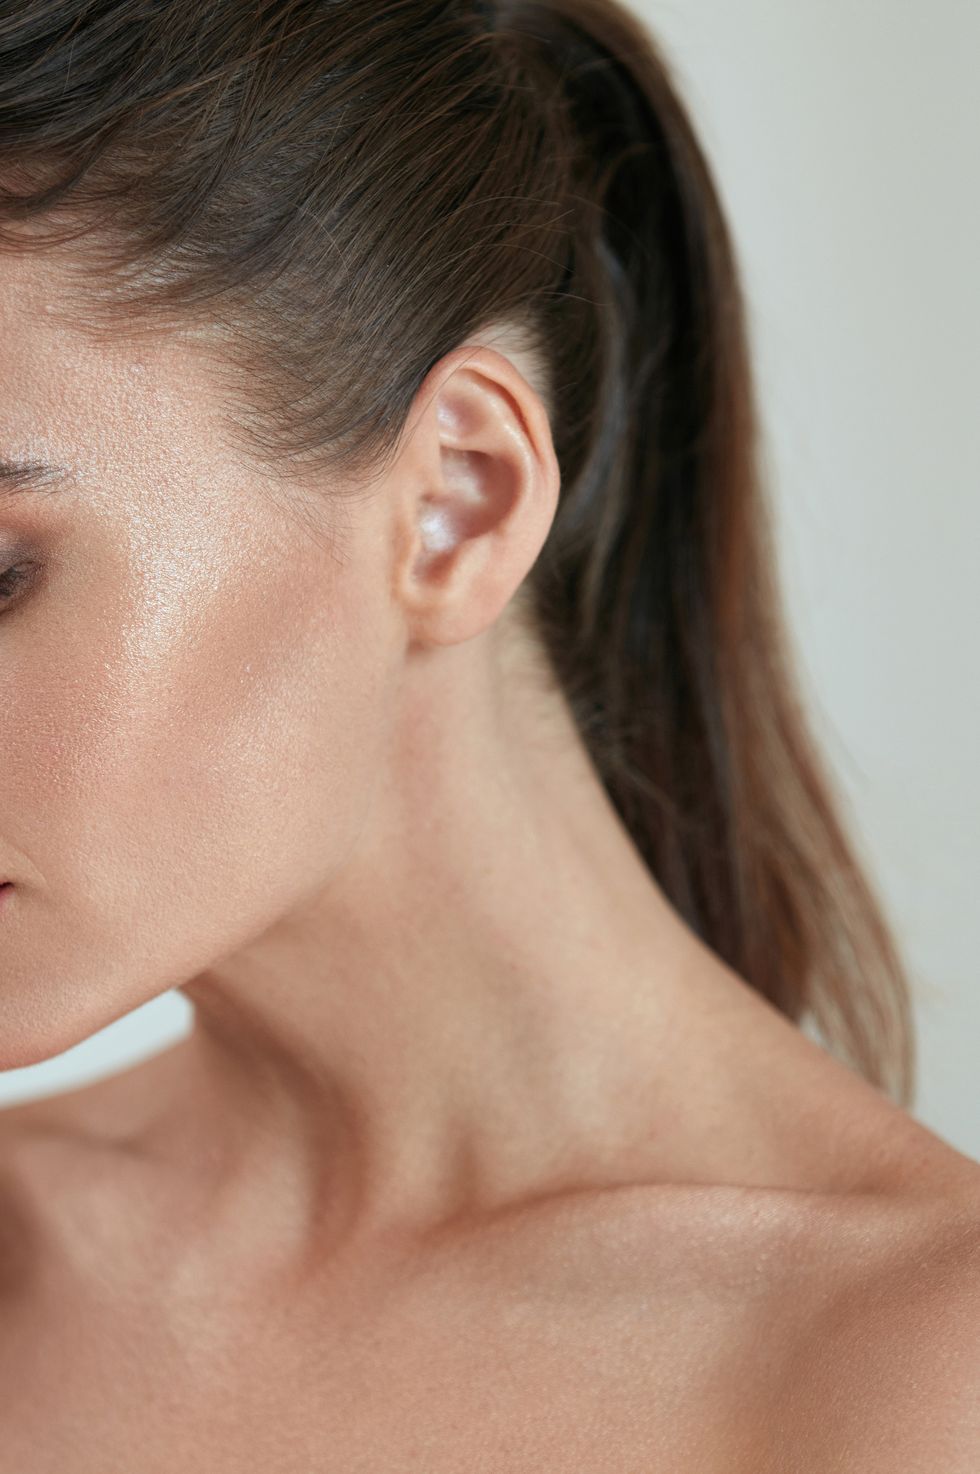 How to Apply Highlighter - Makeup Mistakes Aging You